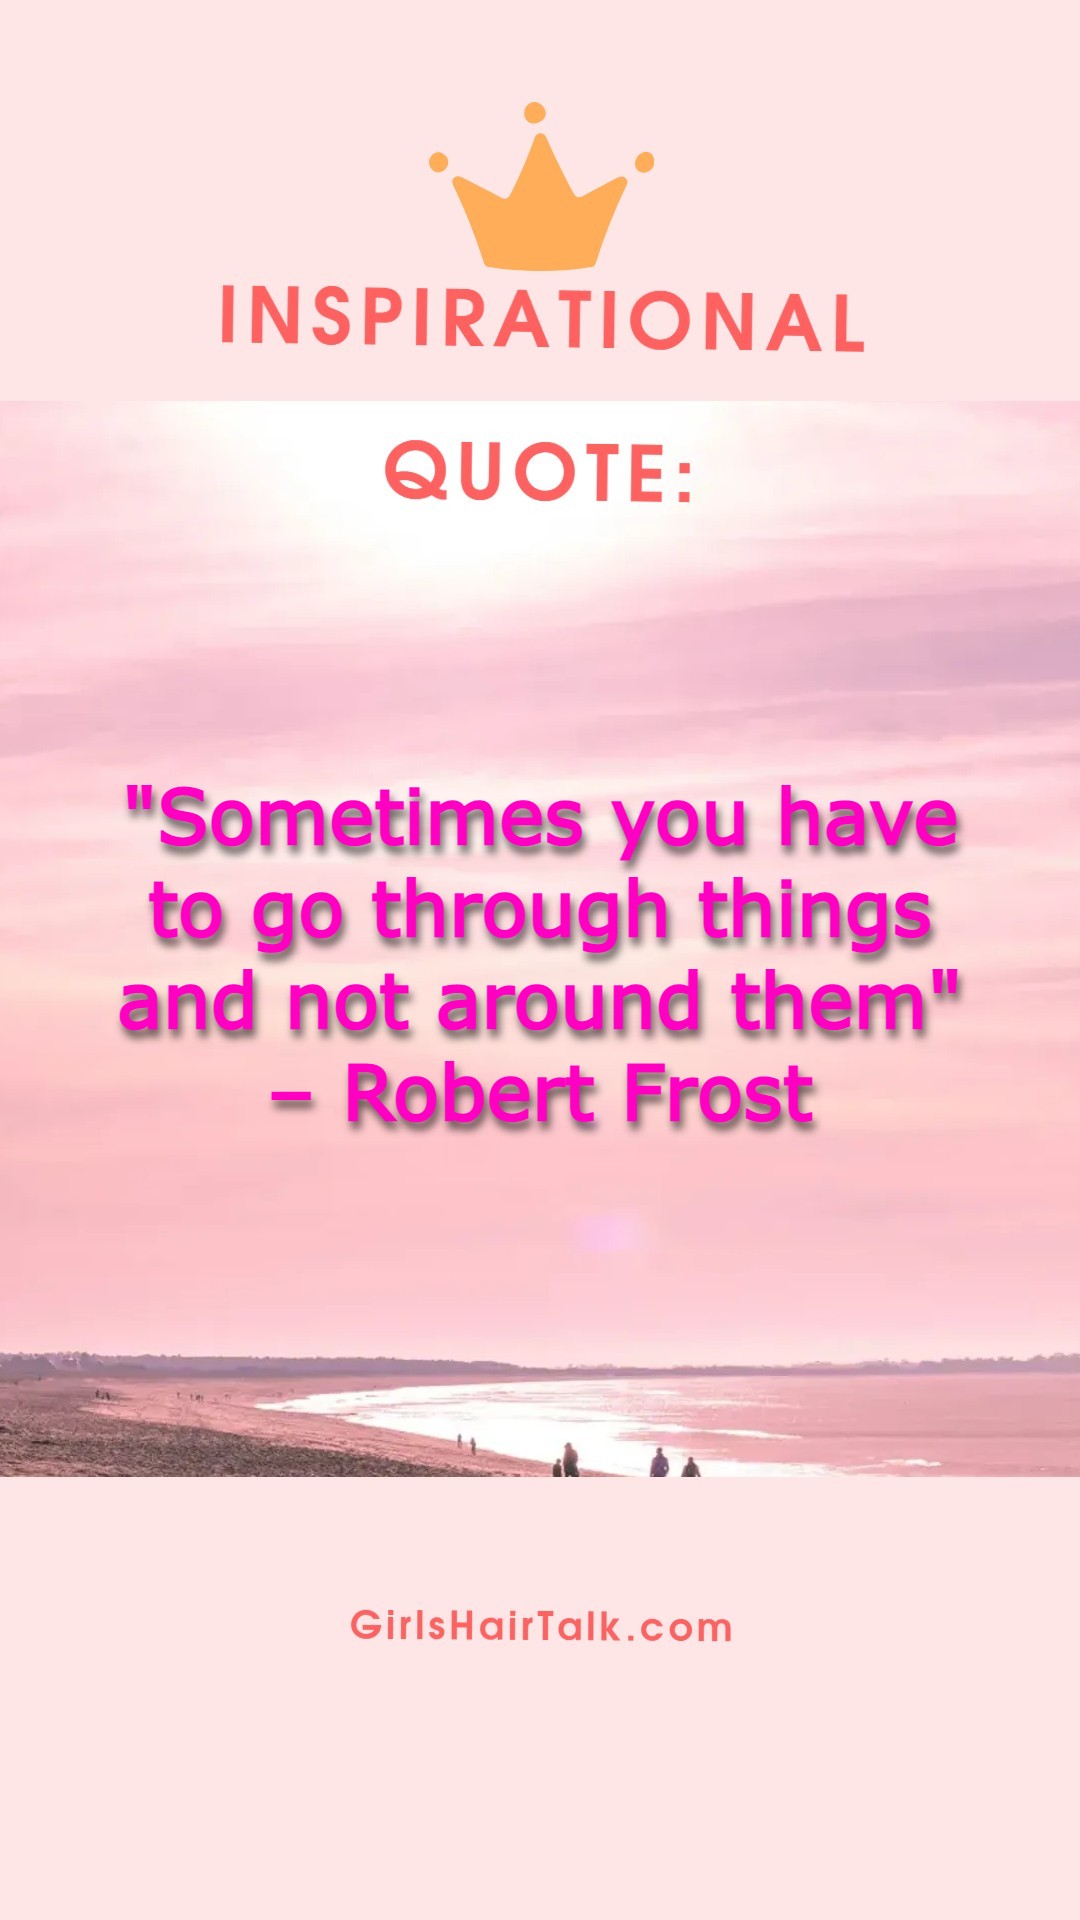 Robert Frost cancer quotes